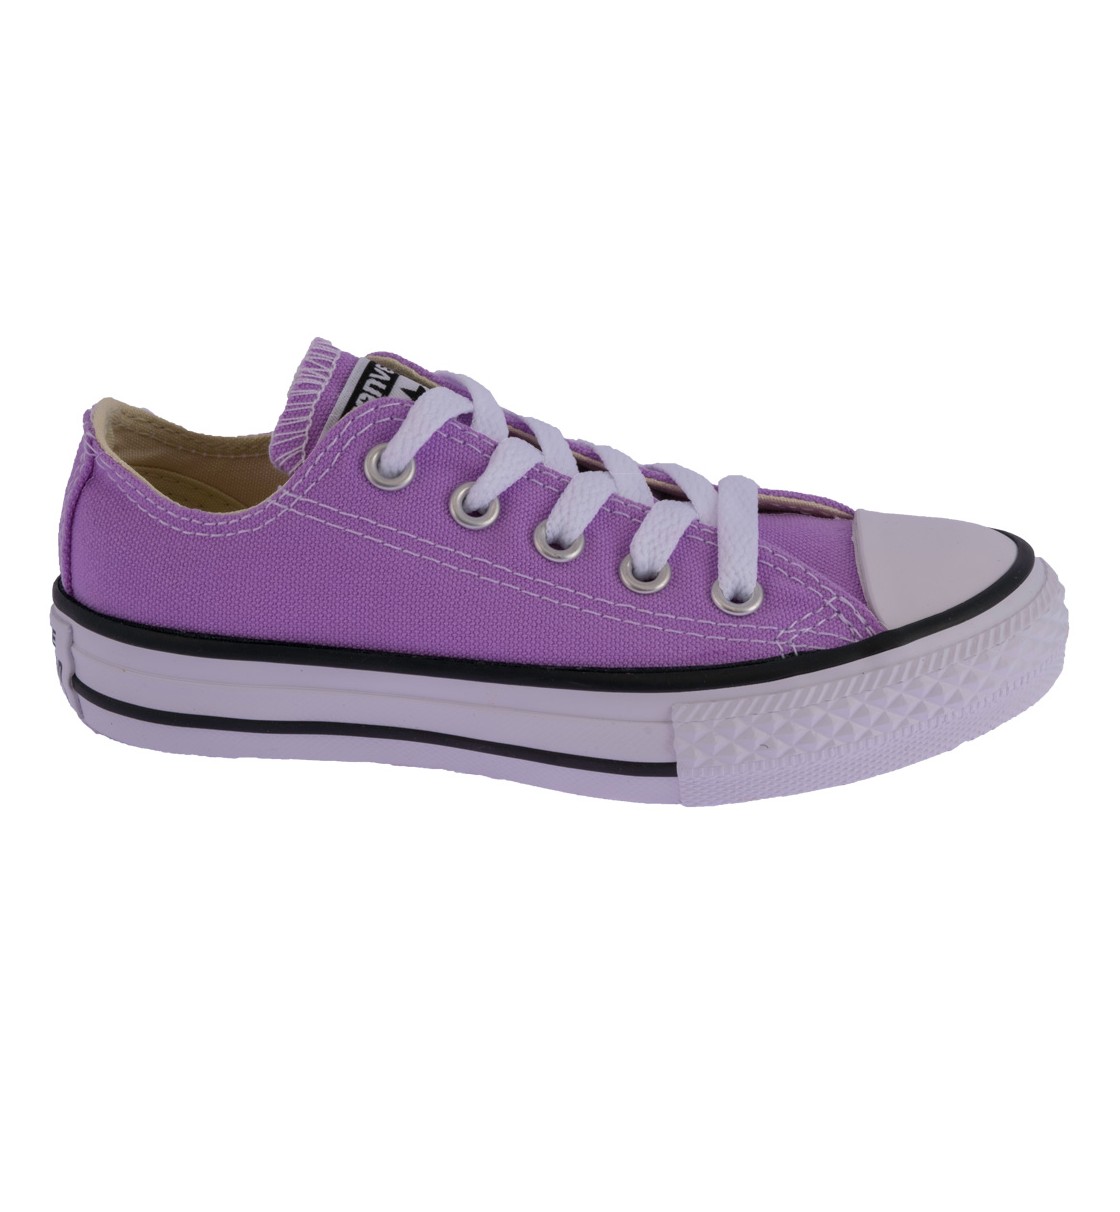 Converse Παιδικό Παπούτσι Μόδας Chuck Taylor All Star Ox 355576C